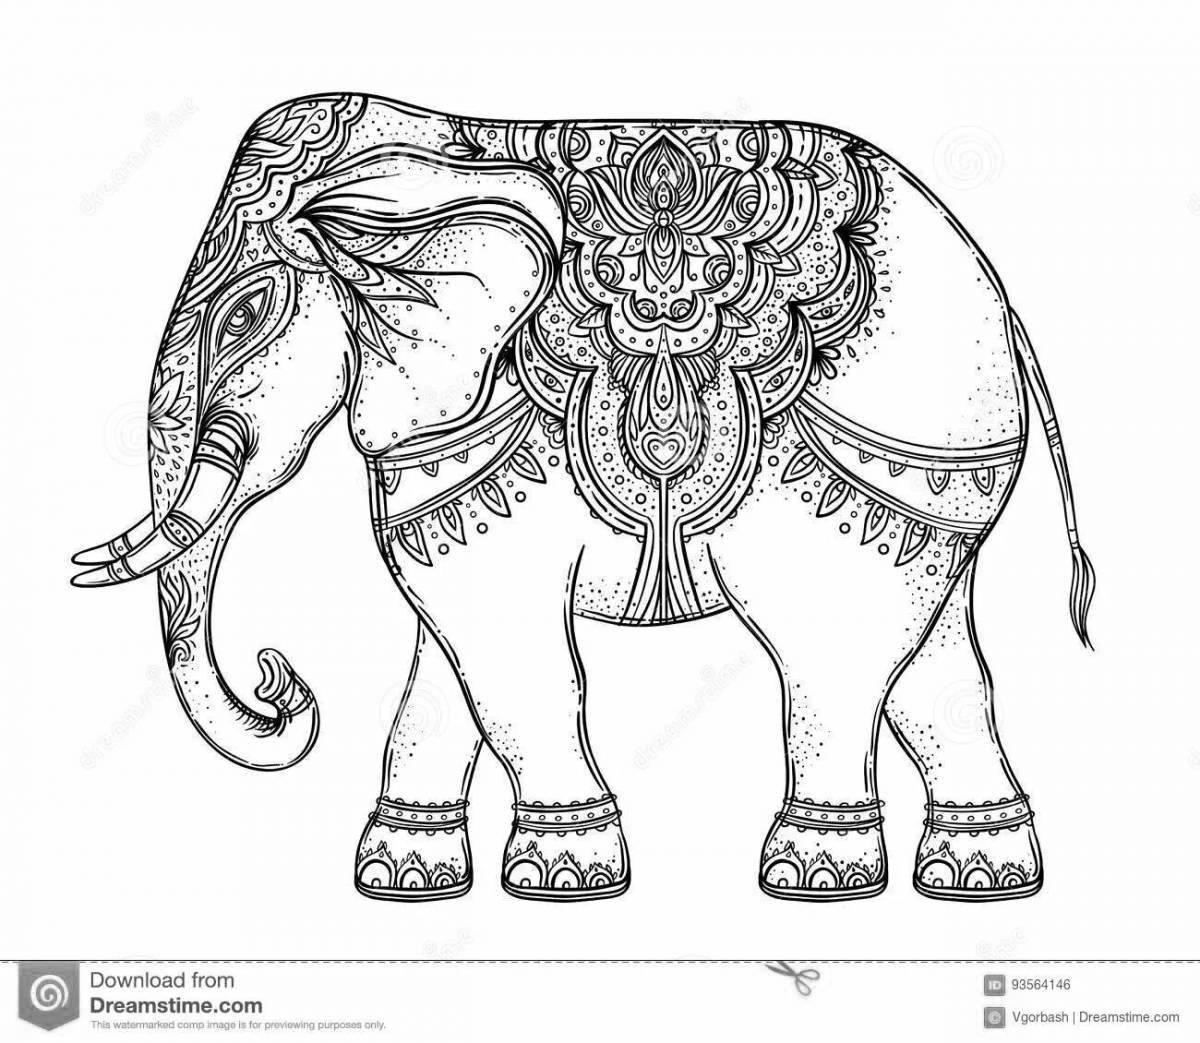 Playful Indian elephant coloring page for kids